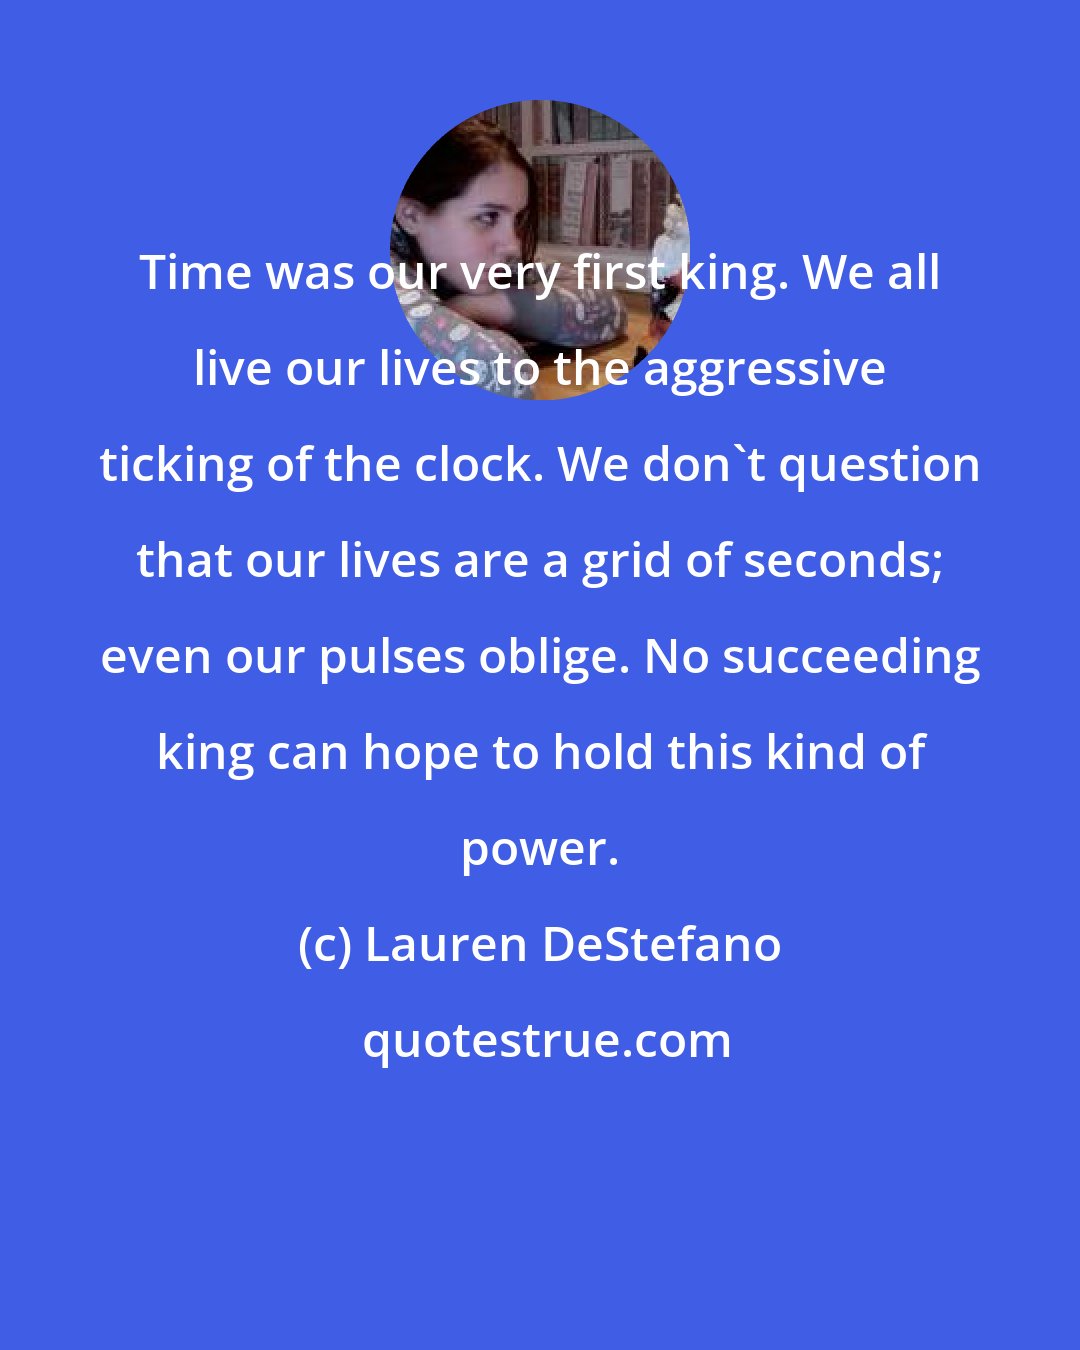 Lauren DeStefano: Time was our very first king. We all live our lives to the aggressive ticking of the clock. We don't question that our lives are a grid of seconds; even our pulses oblige. No succeeding king can hope to hold this kind of power.